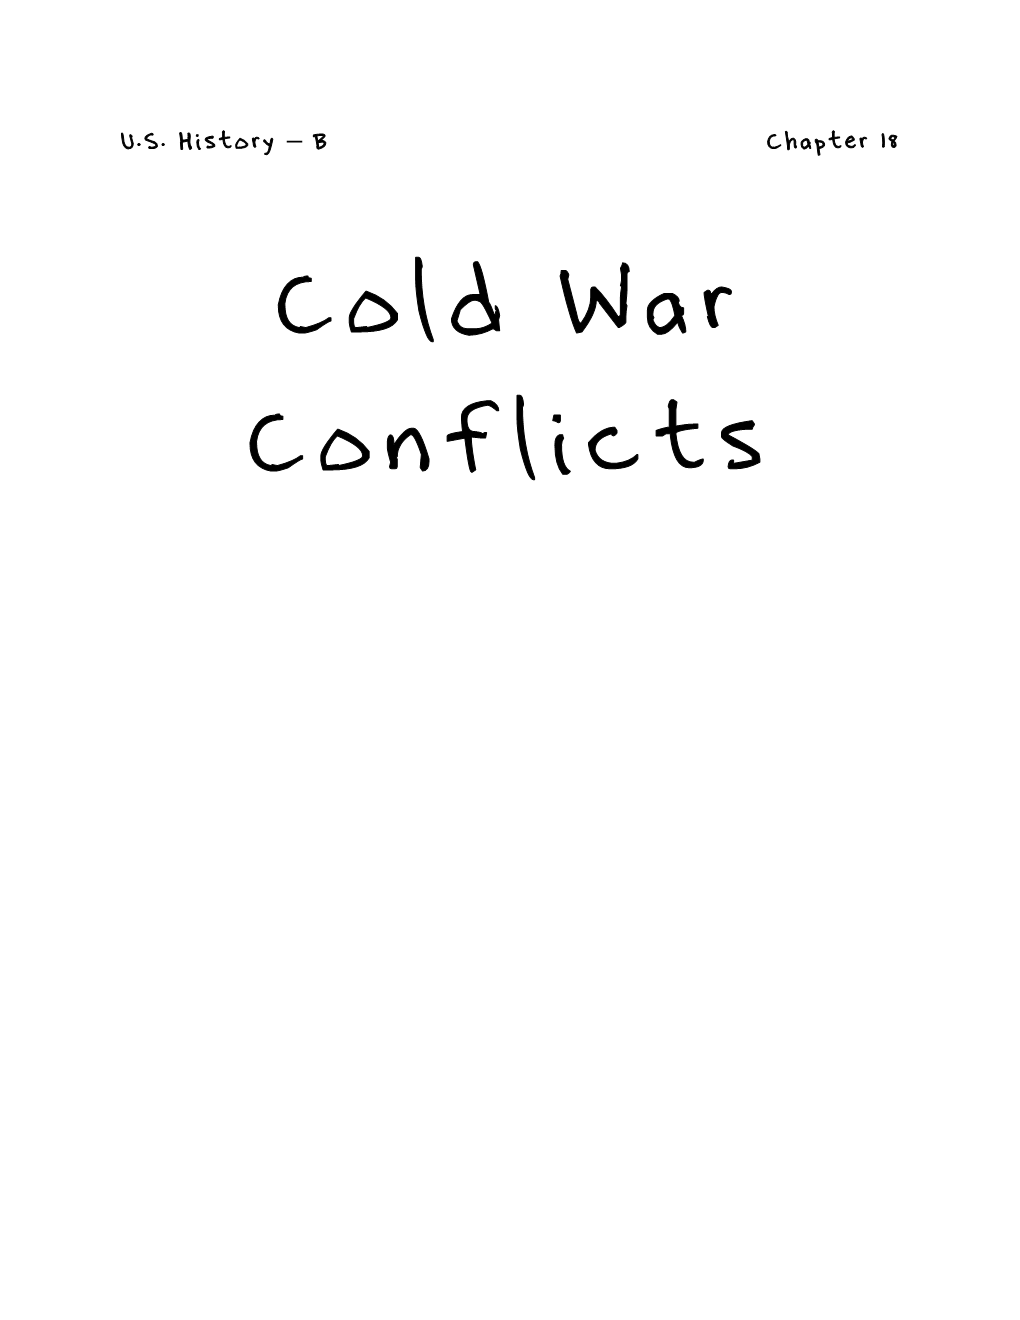 Chapter 18: Cold War Conflicts, 1945-1960